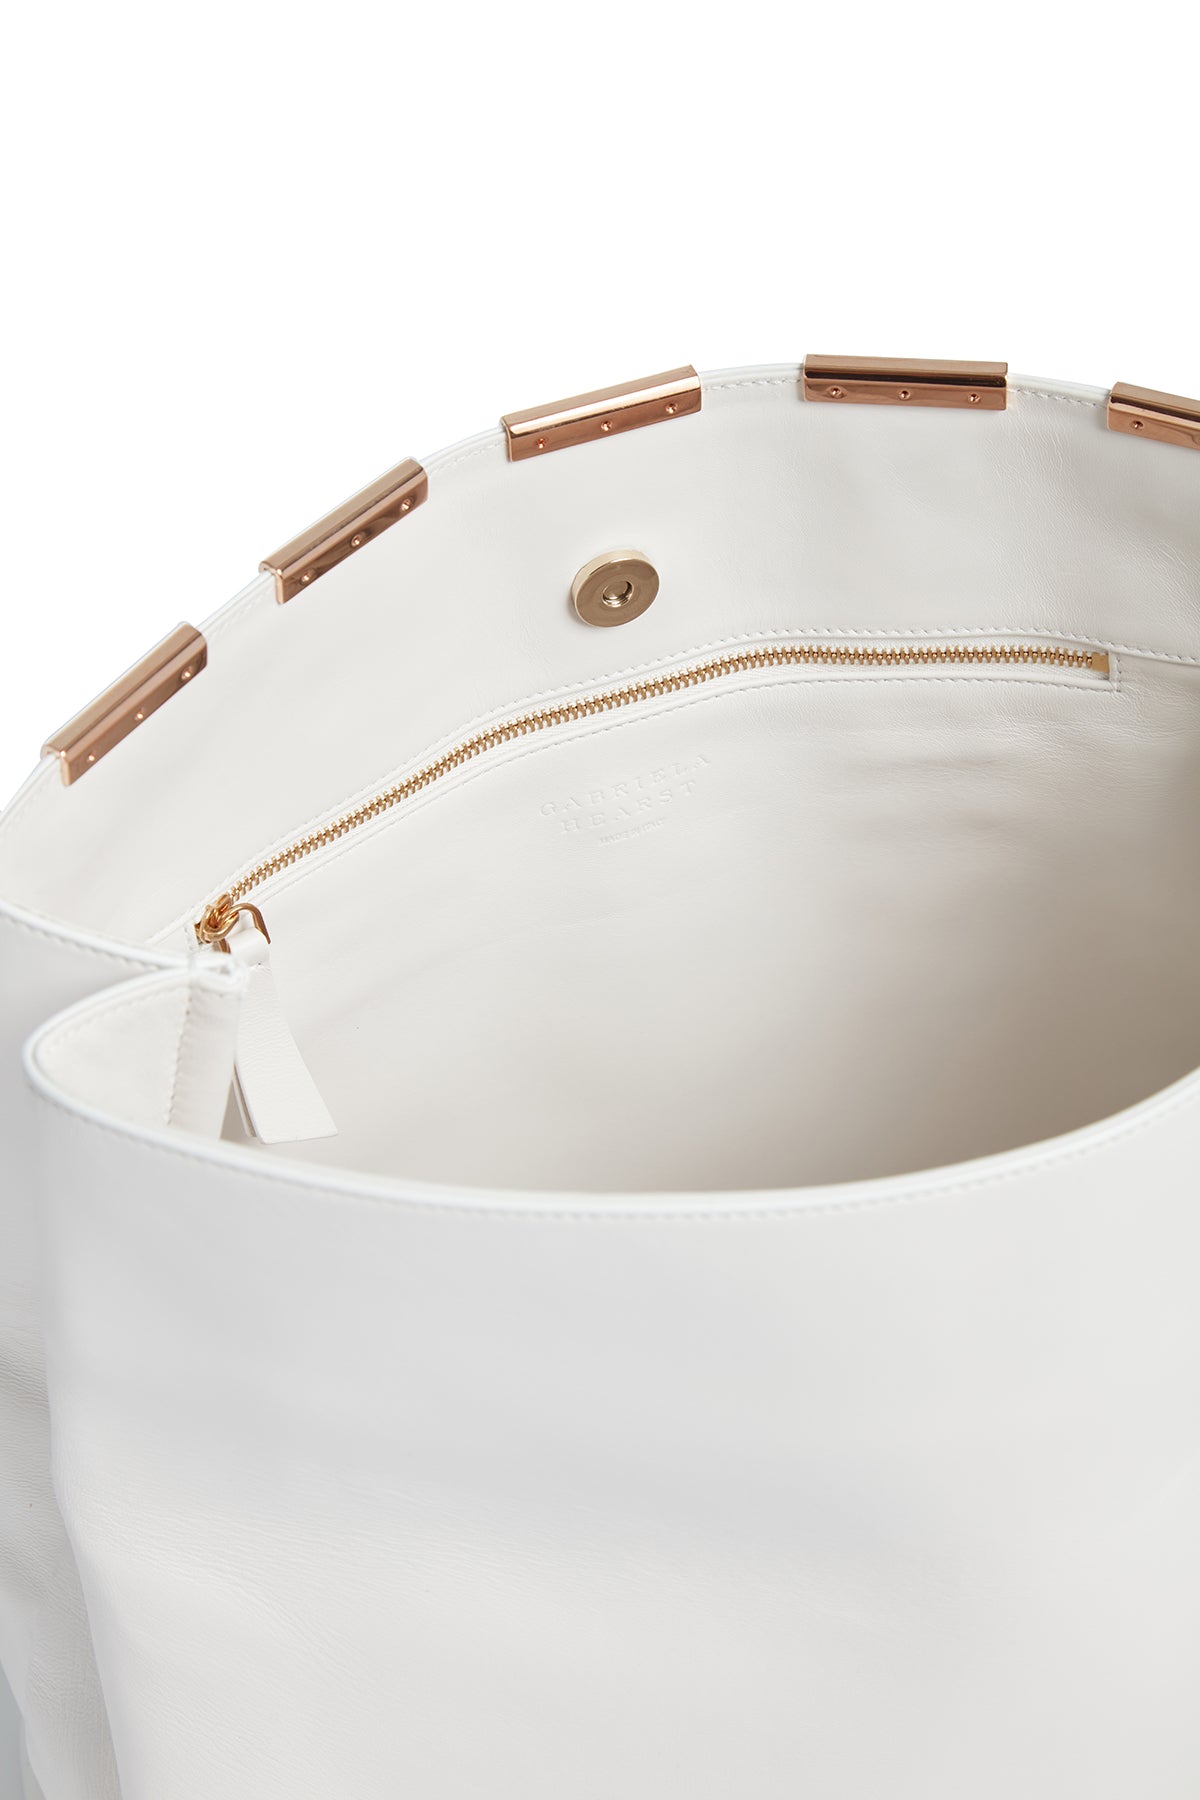 Phoebe Foldover Bag in Ivory Nappa Leather with Rose Gold Hardware